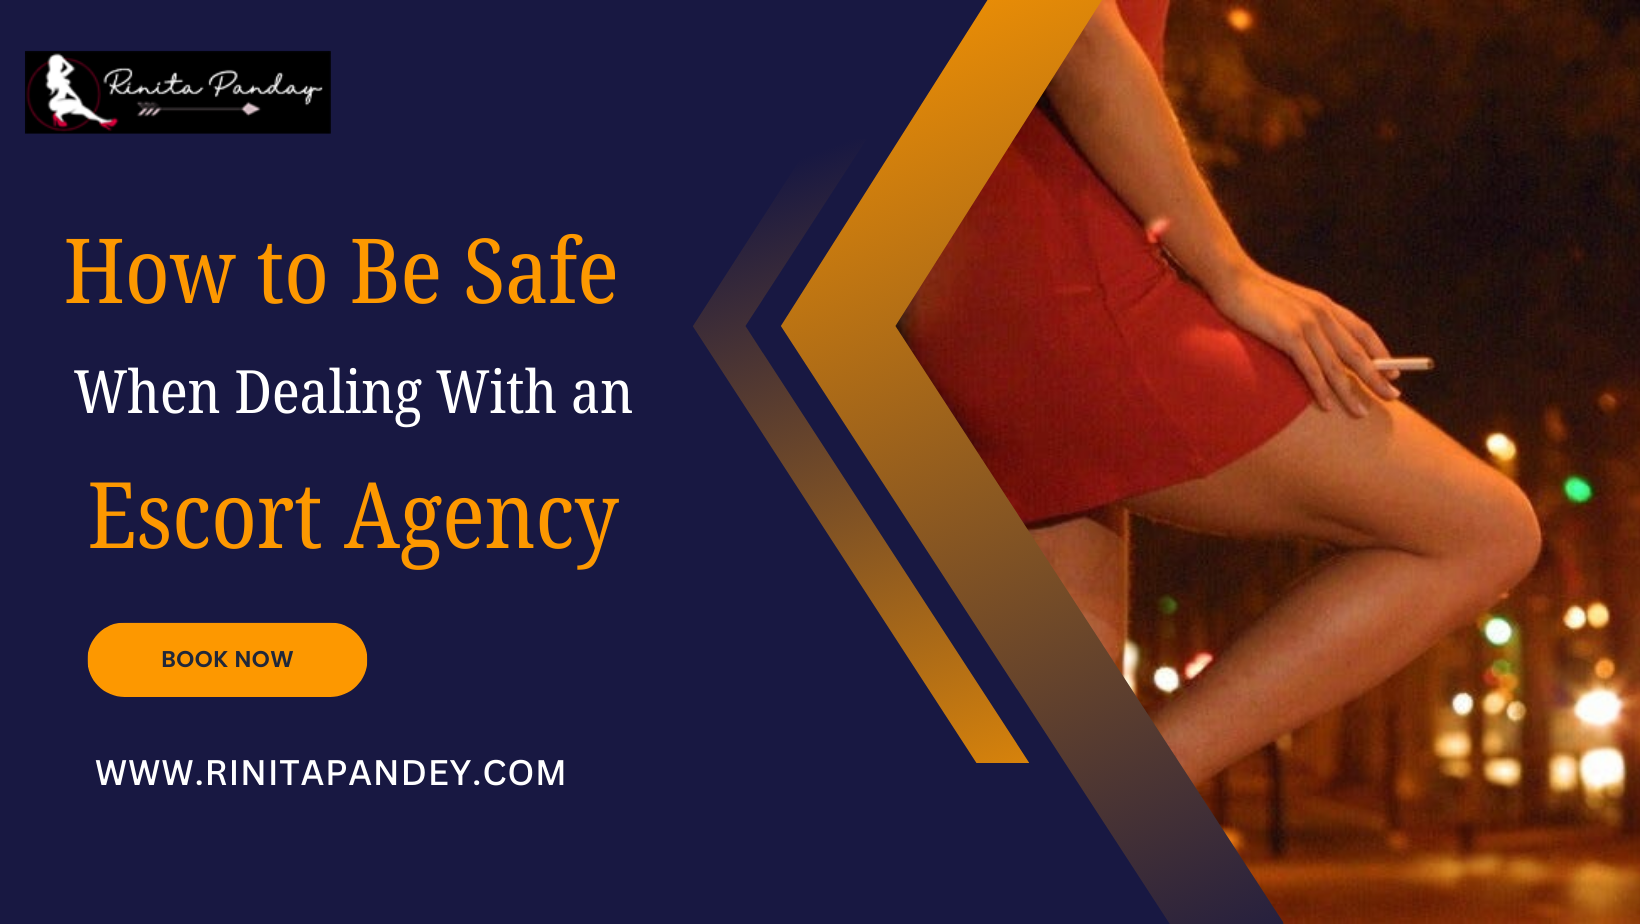 How to Be Safe When Dealing With an Escort Agency